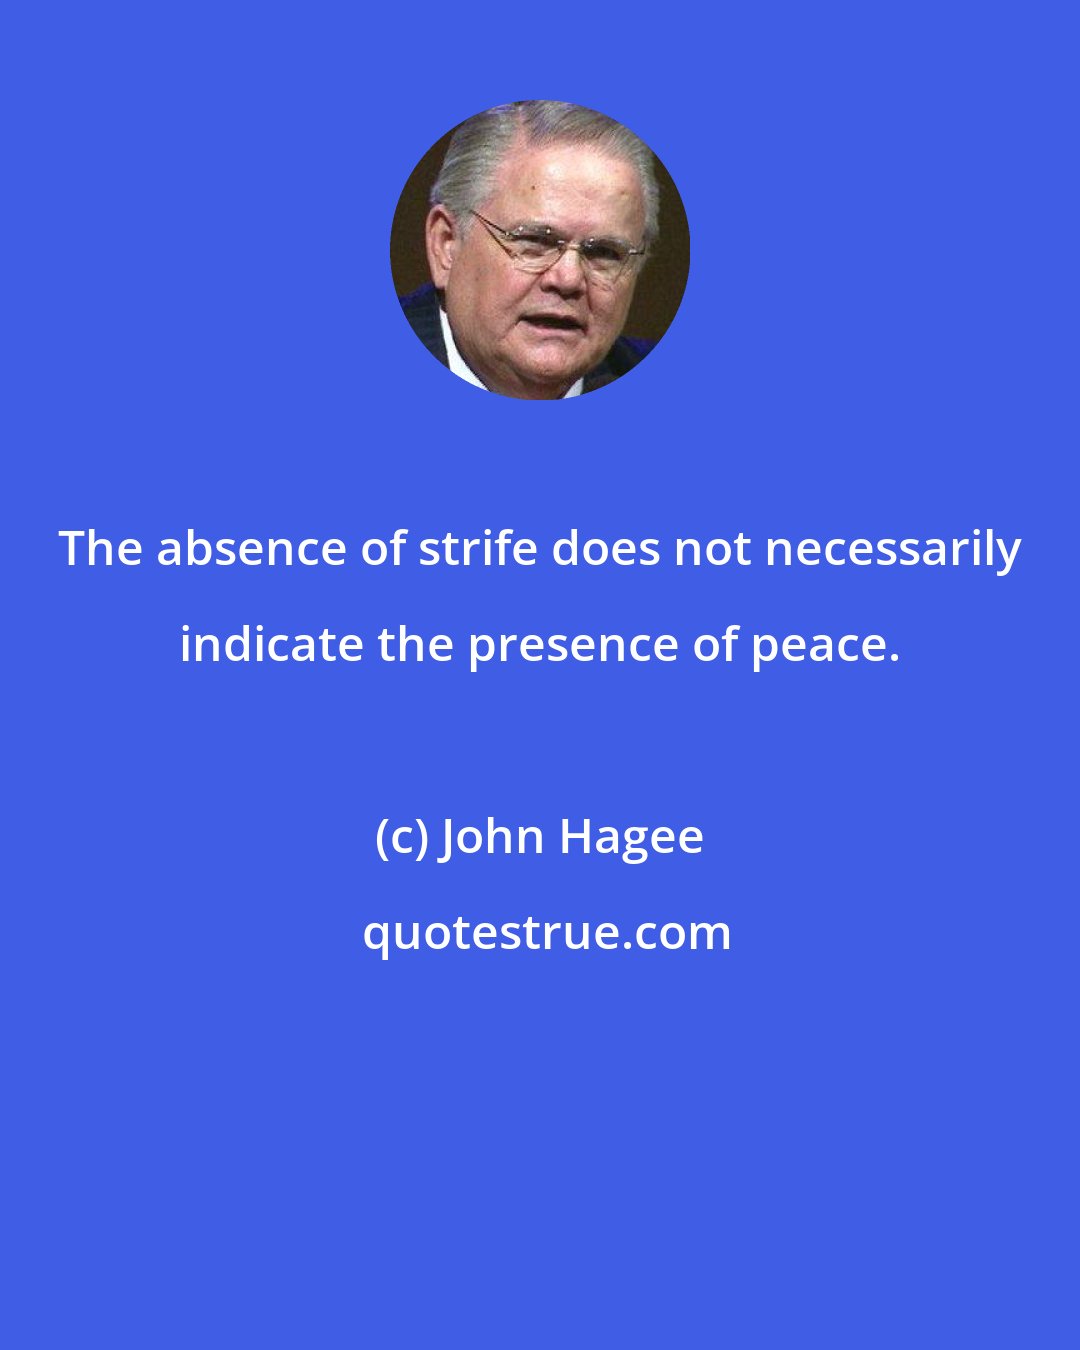 John Hagee: The absence of strife does not necessarily indicate the presence of peace.